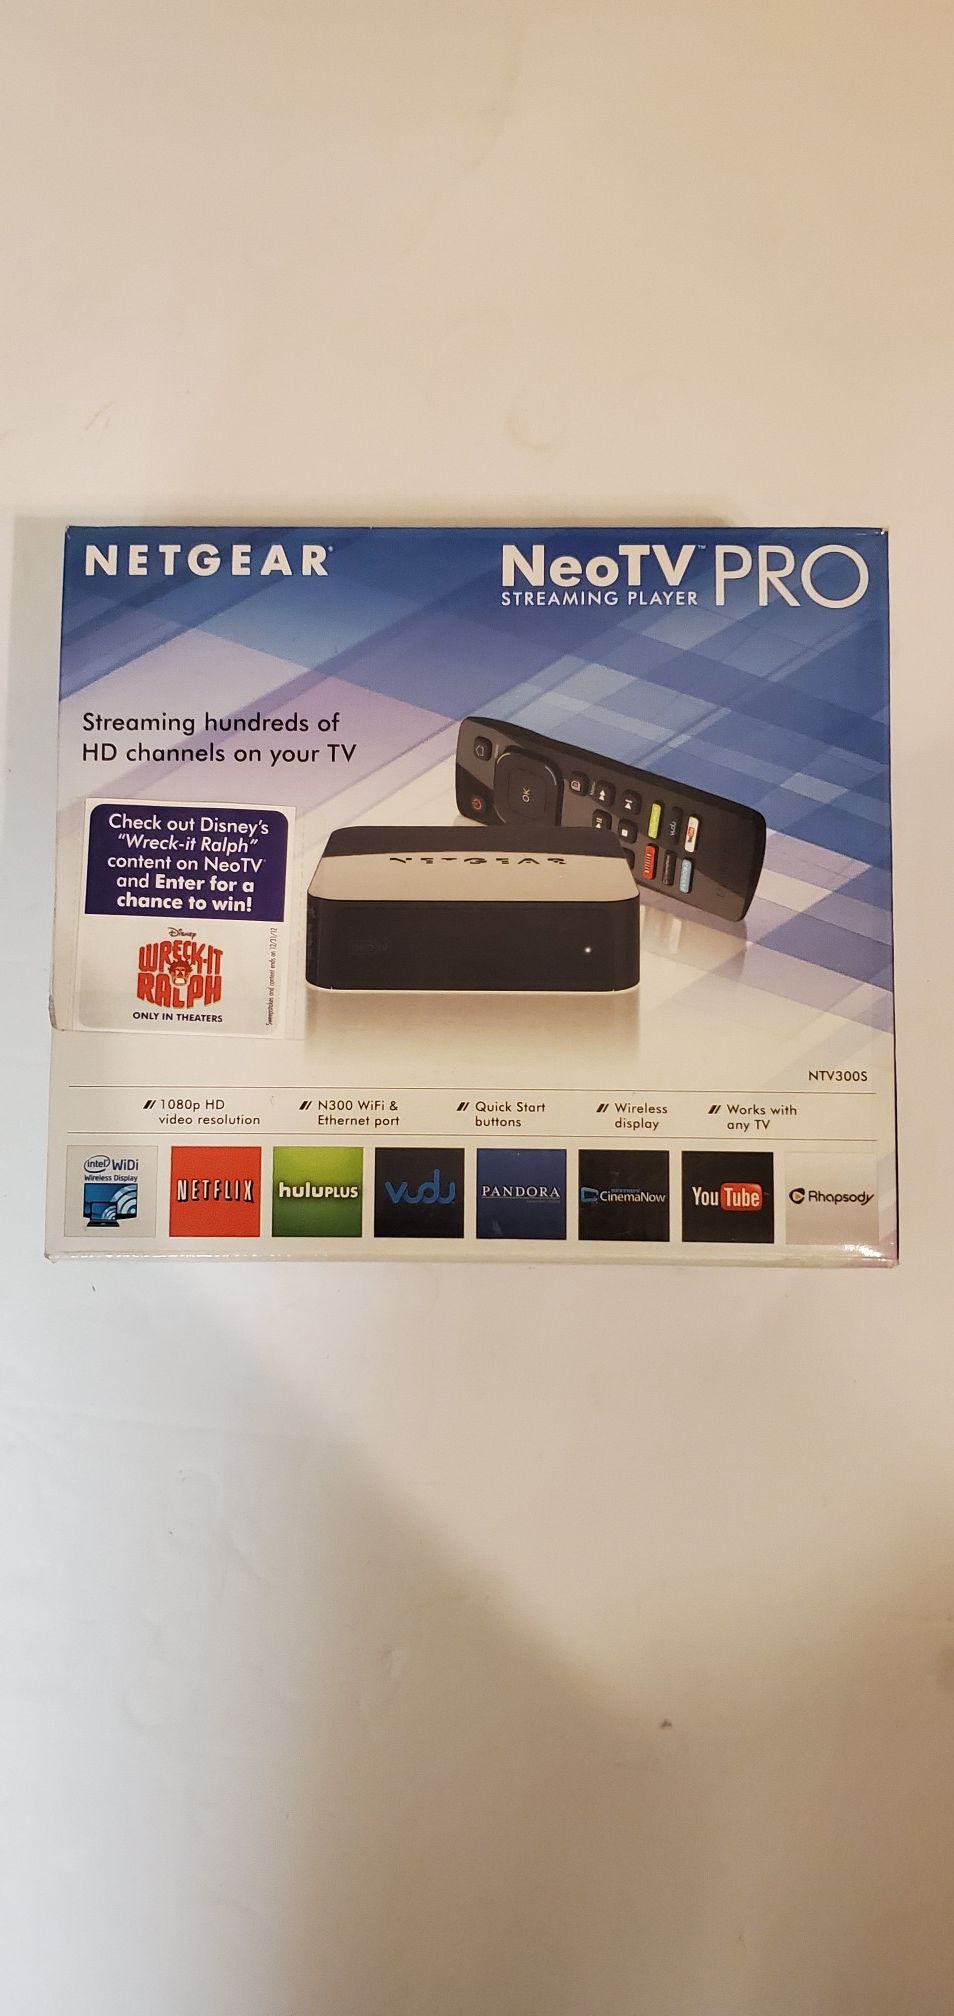 NeoTV pro streaming player